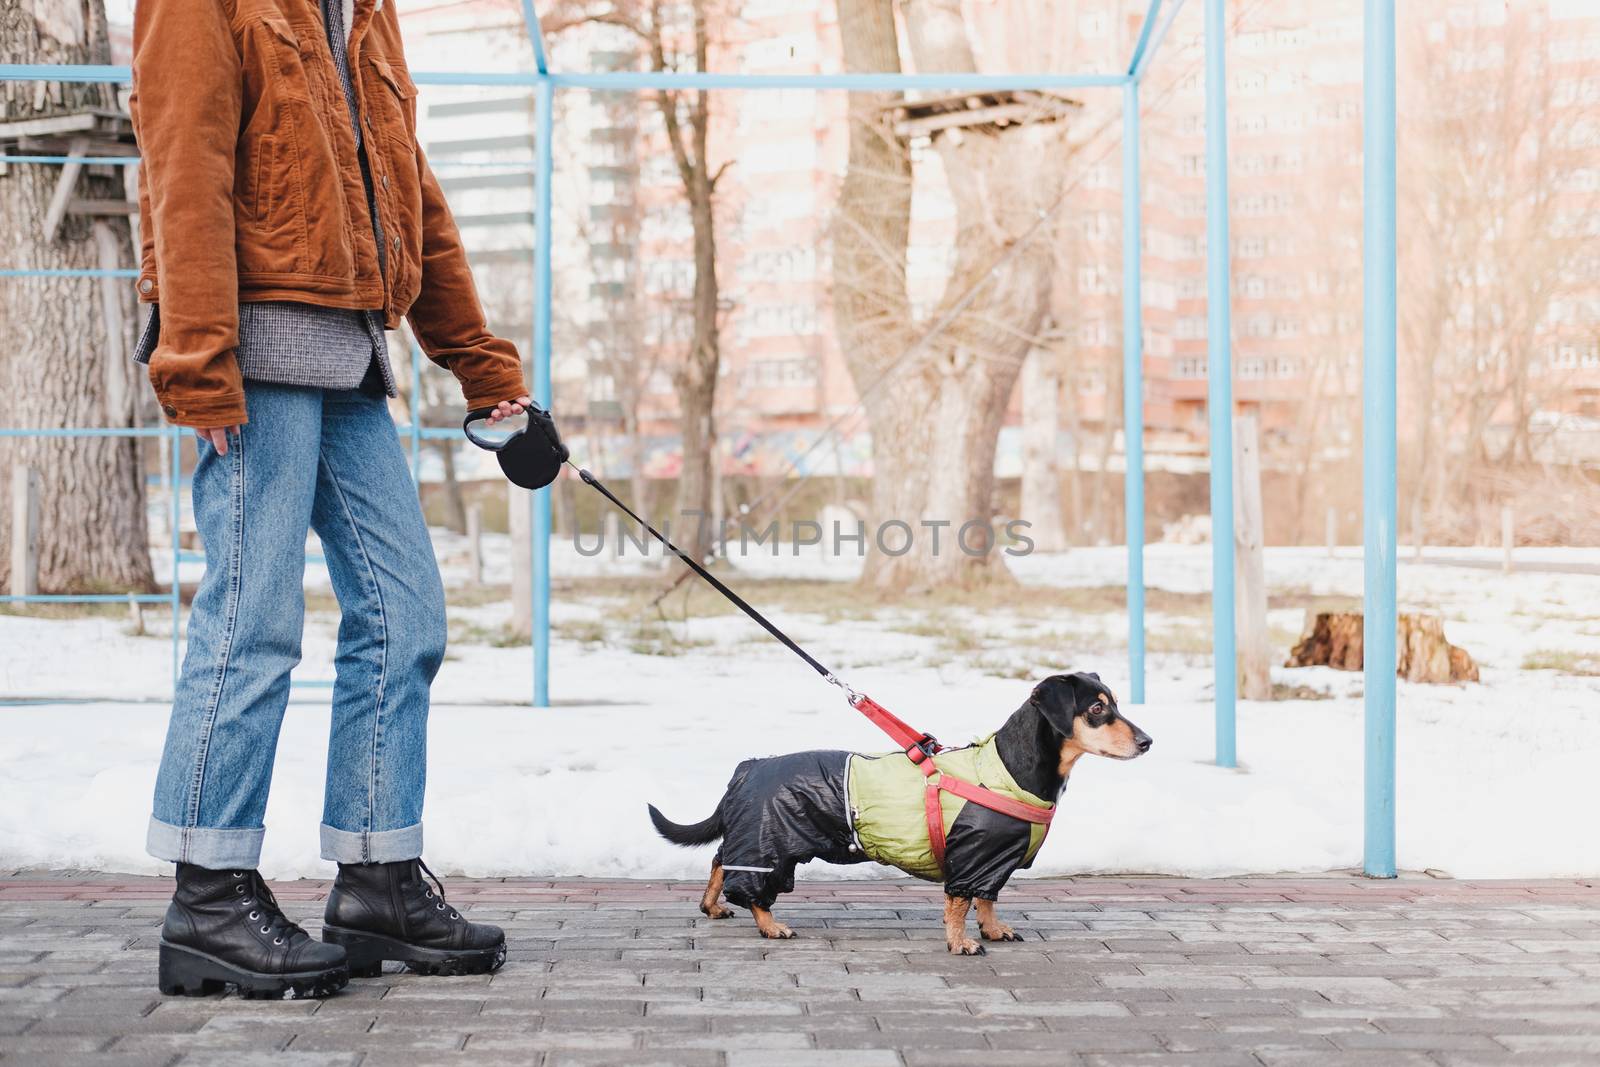 Walking a dog on the leash at park. by photoboyko